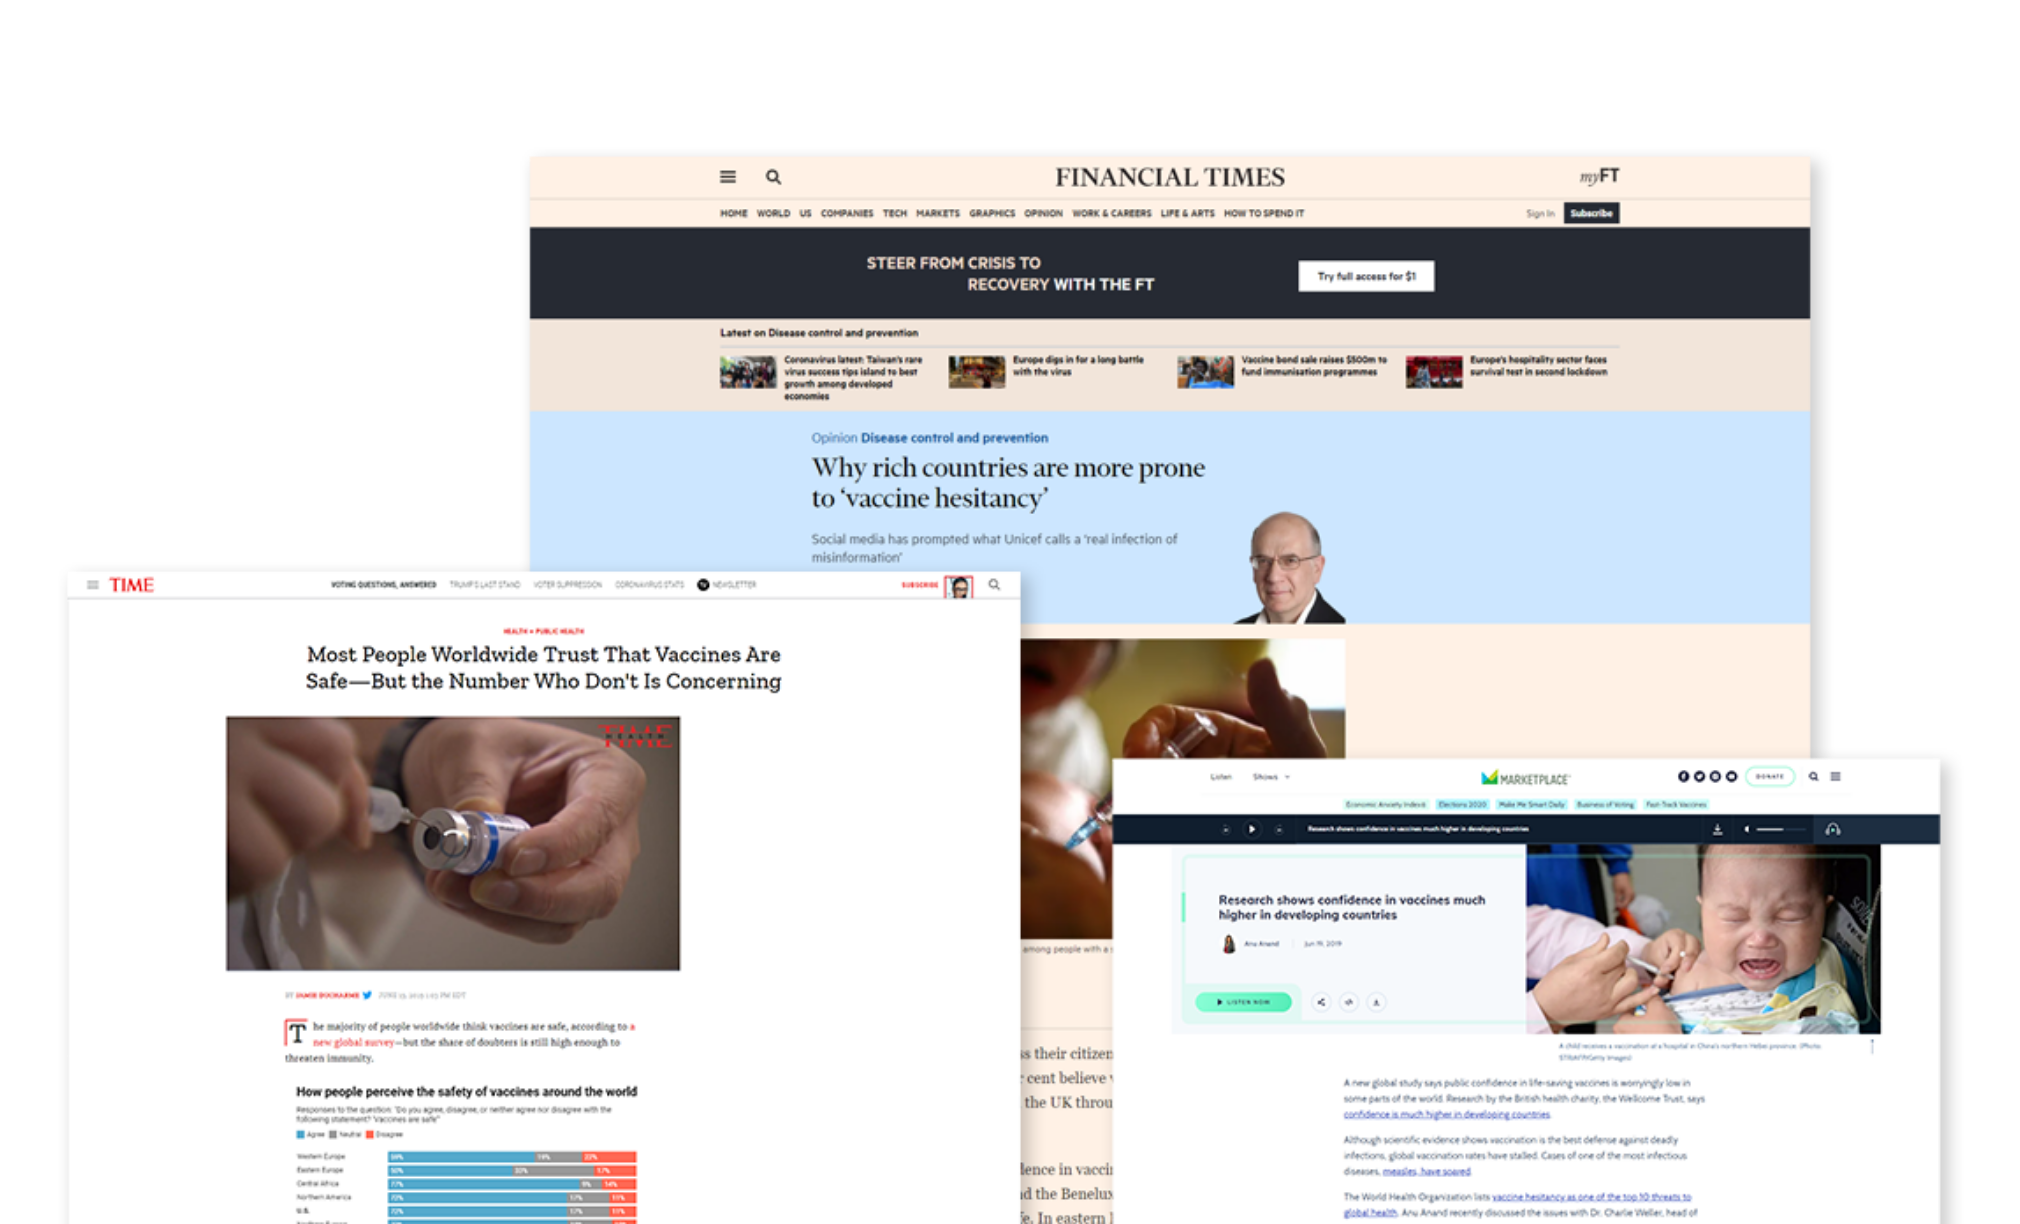 Descriptive image of news articles featuring the Wellcome Global Monitor. 